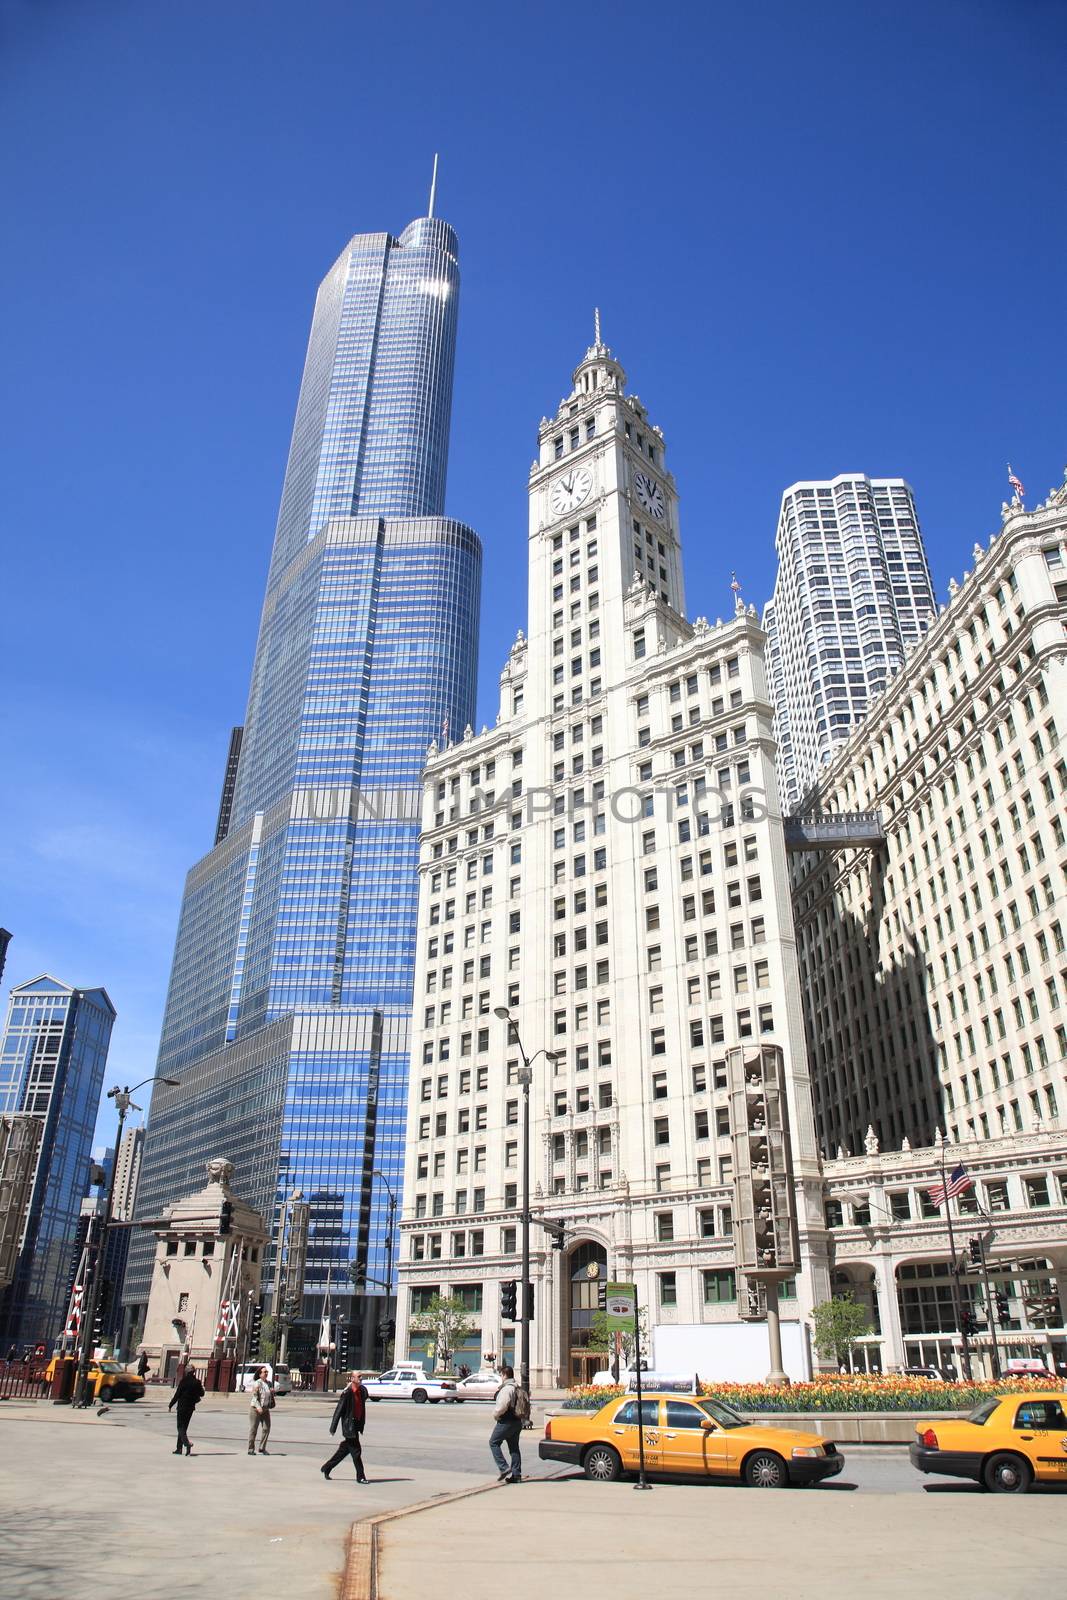 Chicago - Wrigley Building by Ffooter